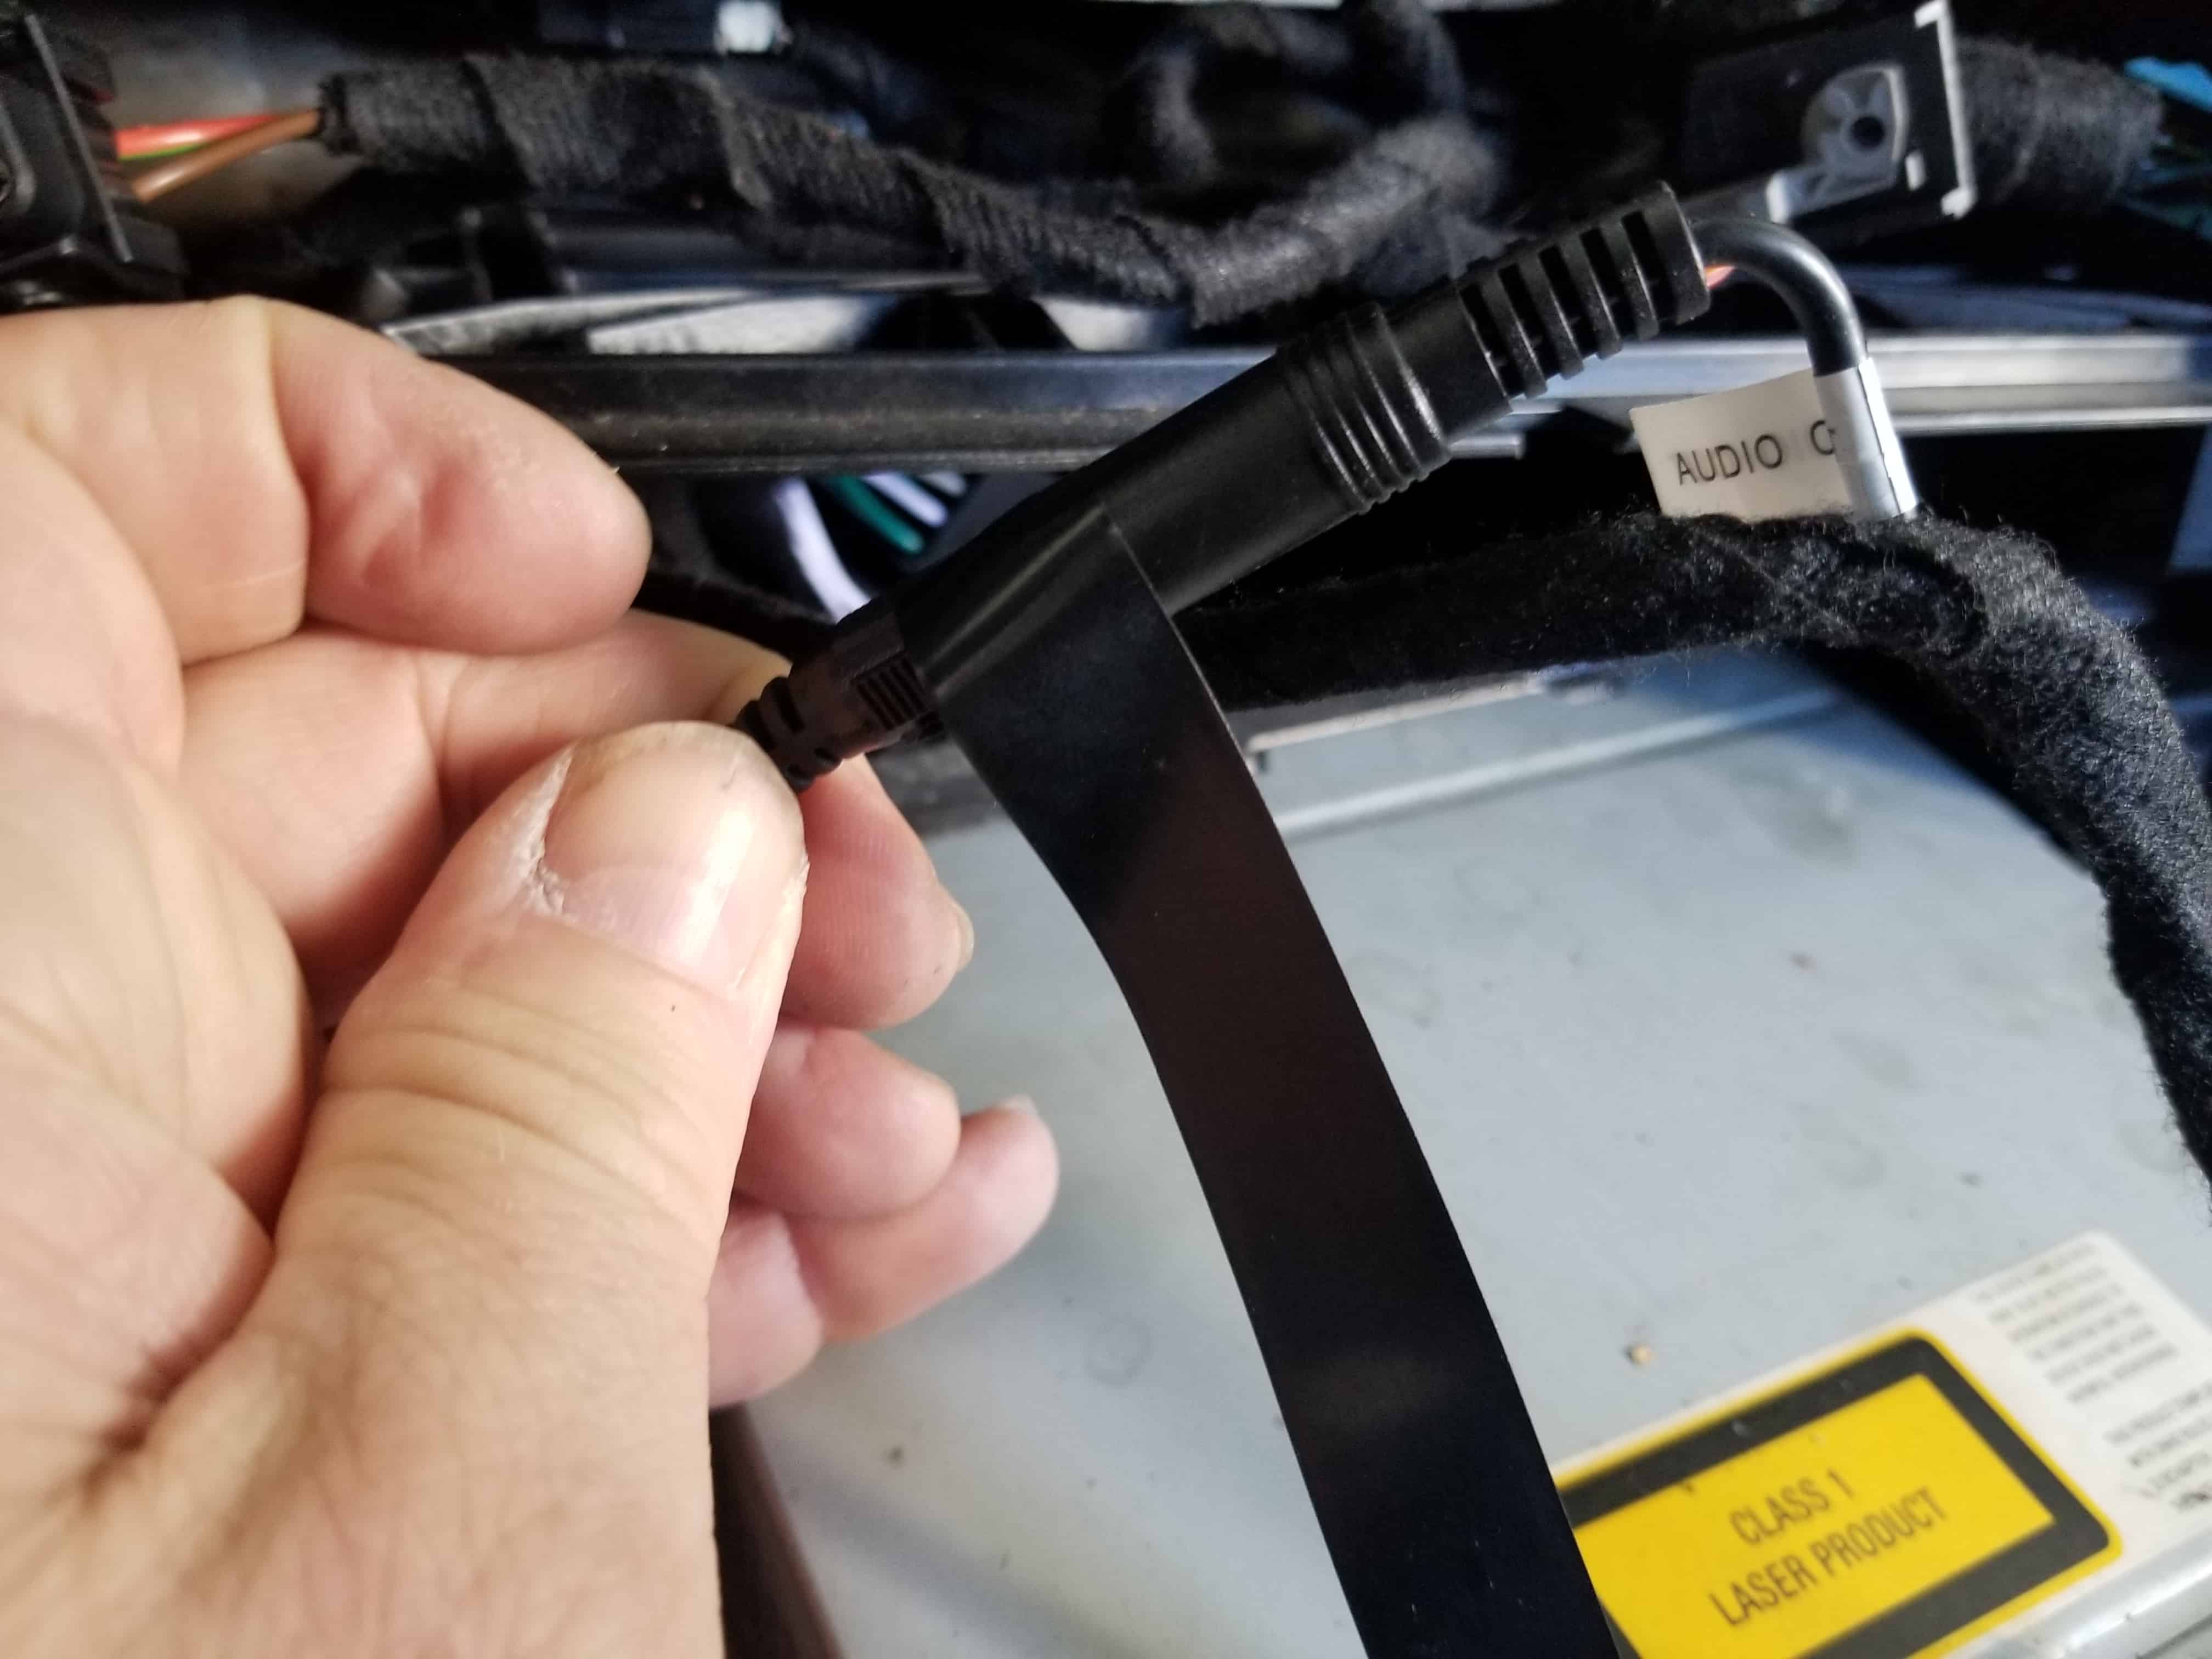 bmw e60 idrive upgrade - Tightly wrap the audio wire connection with electrical tape to keep them from pulling apart.